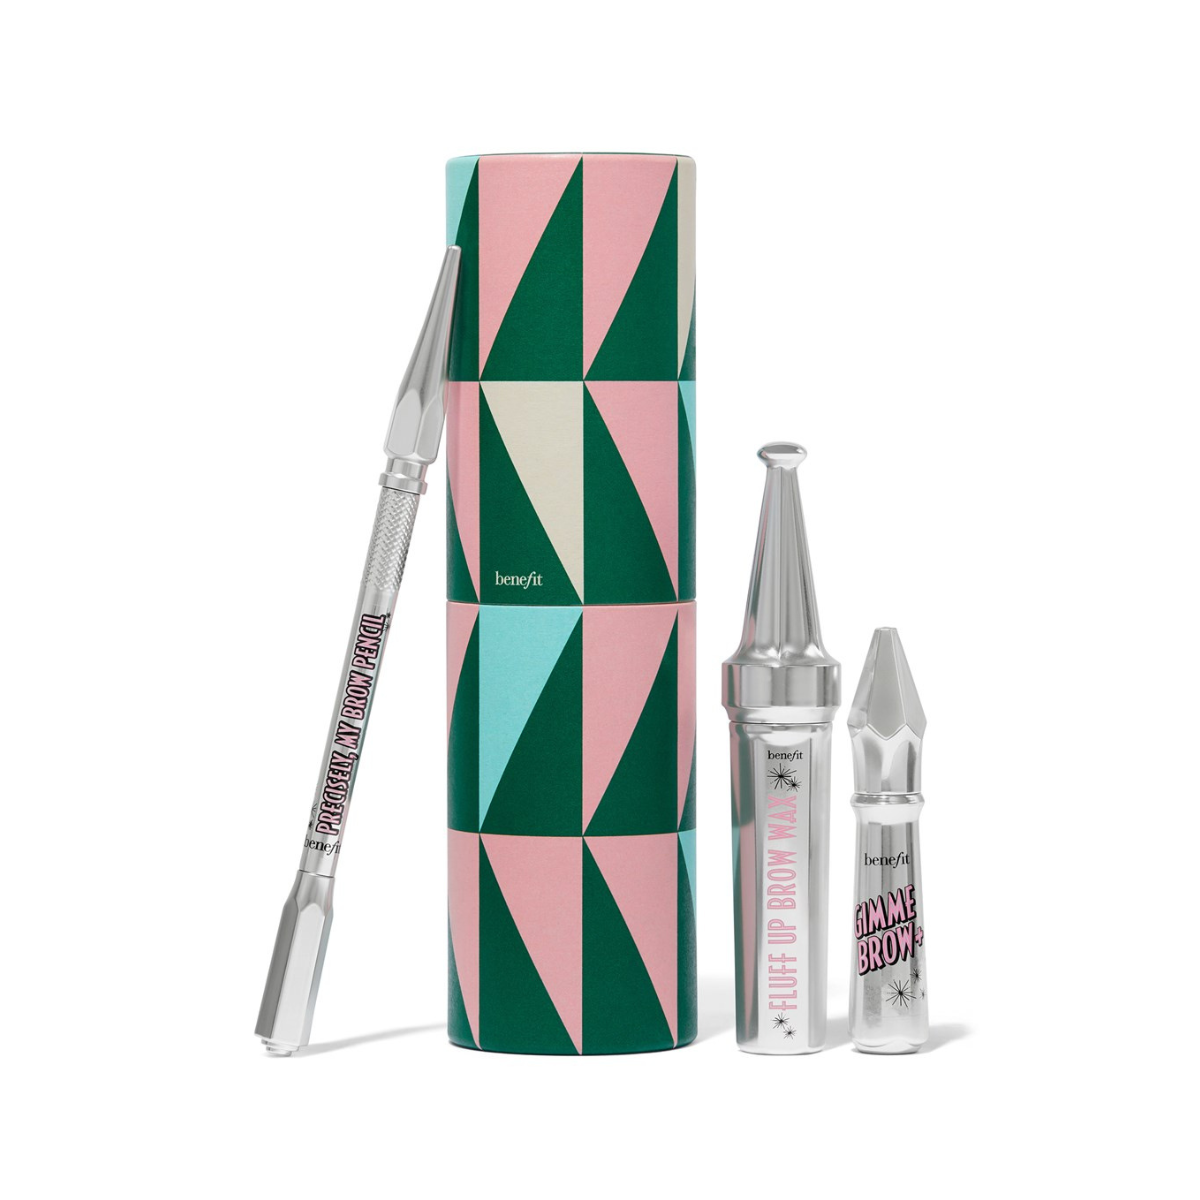 Benefit Fluffin' Festive Brows Brow Set